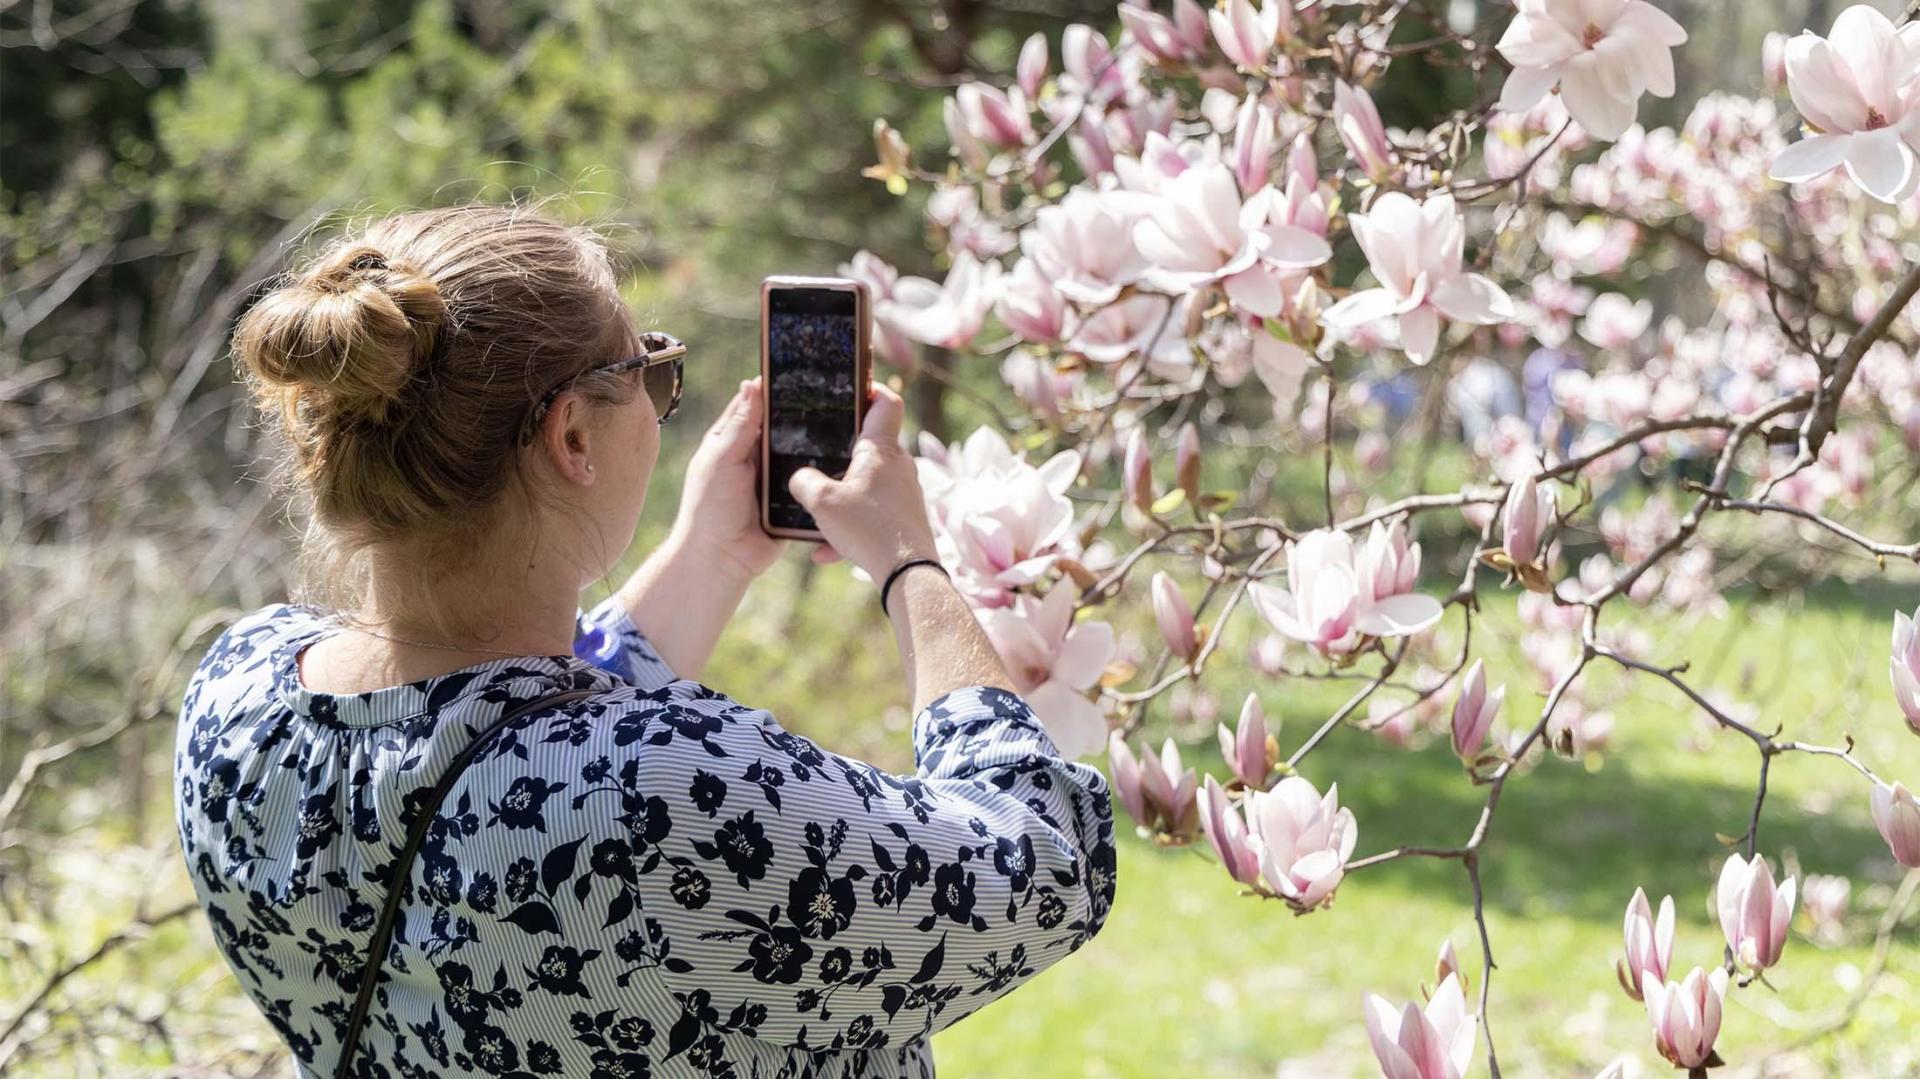 A person taking photos of flowers.